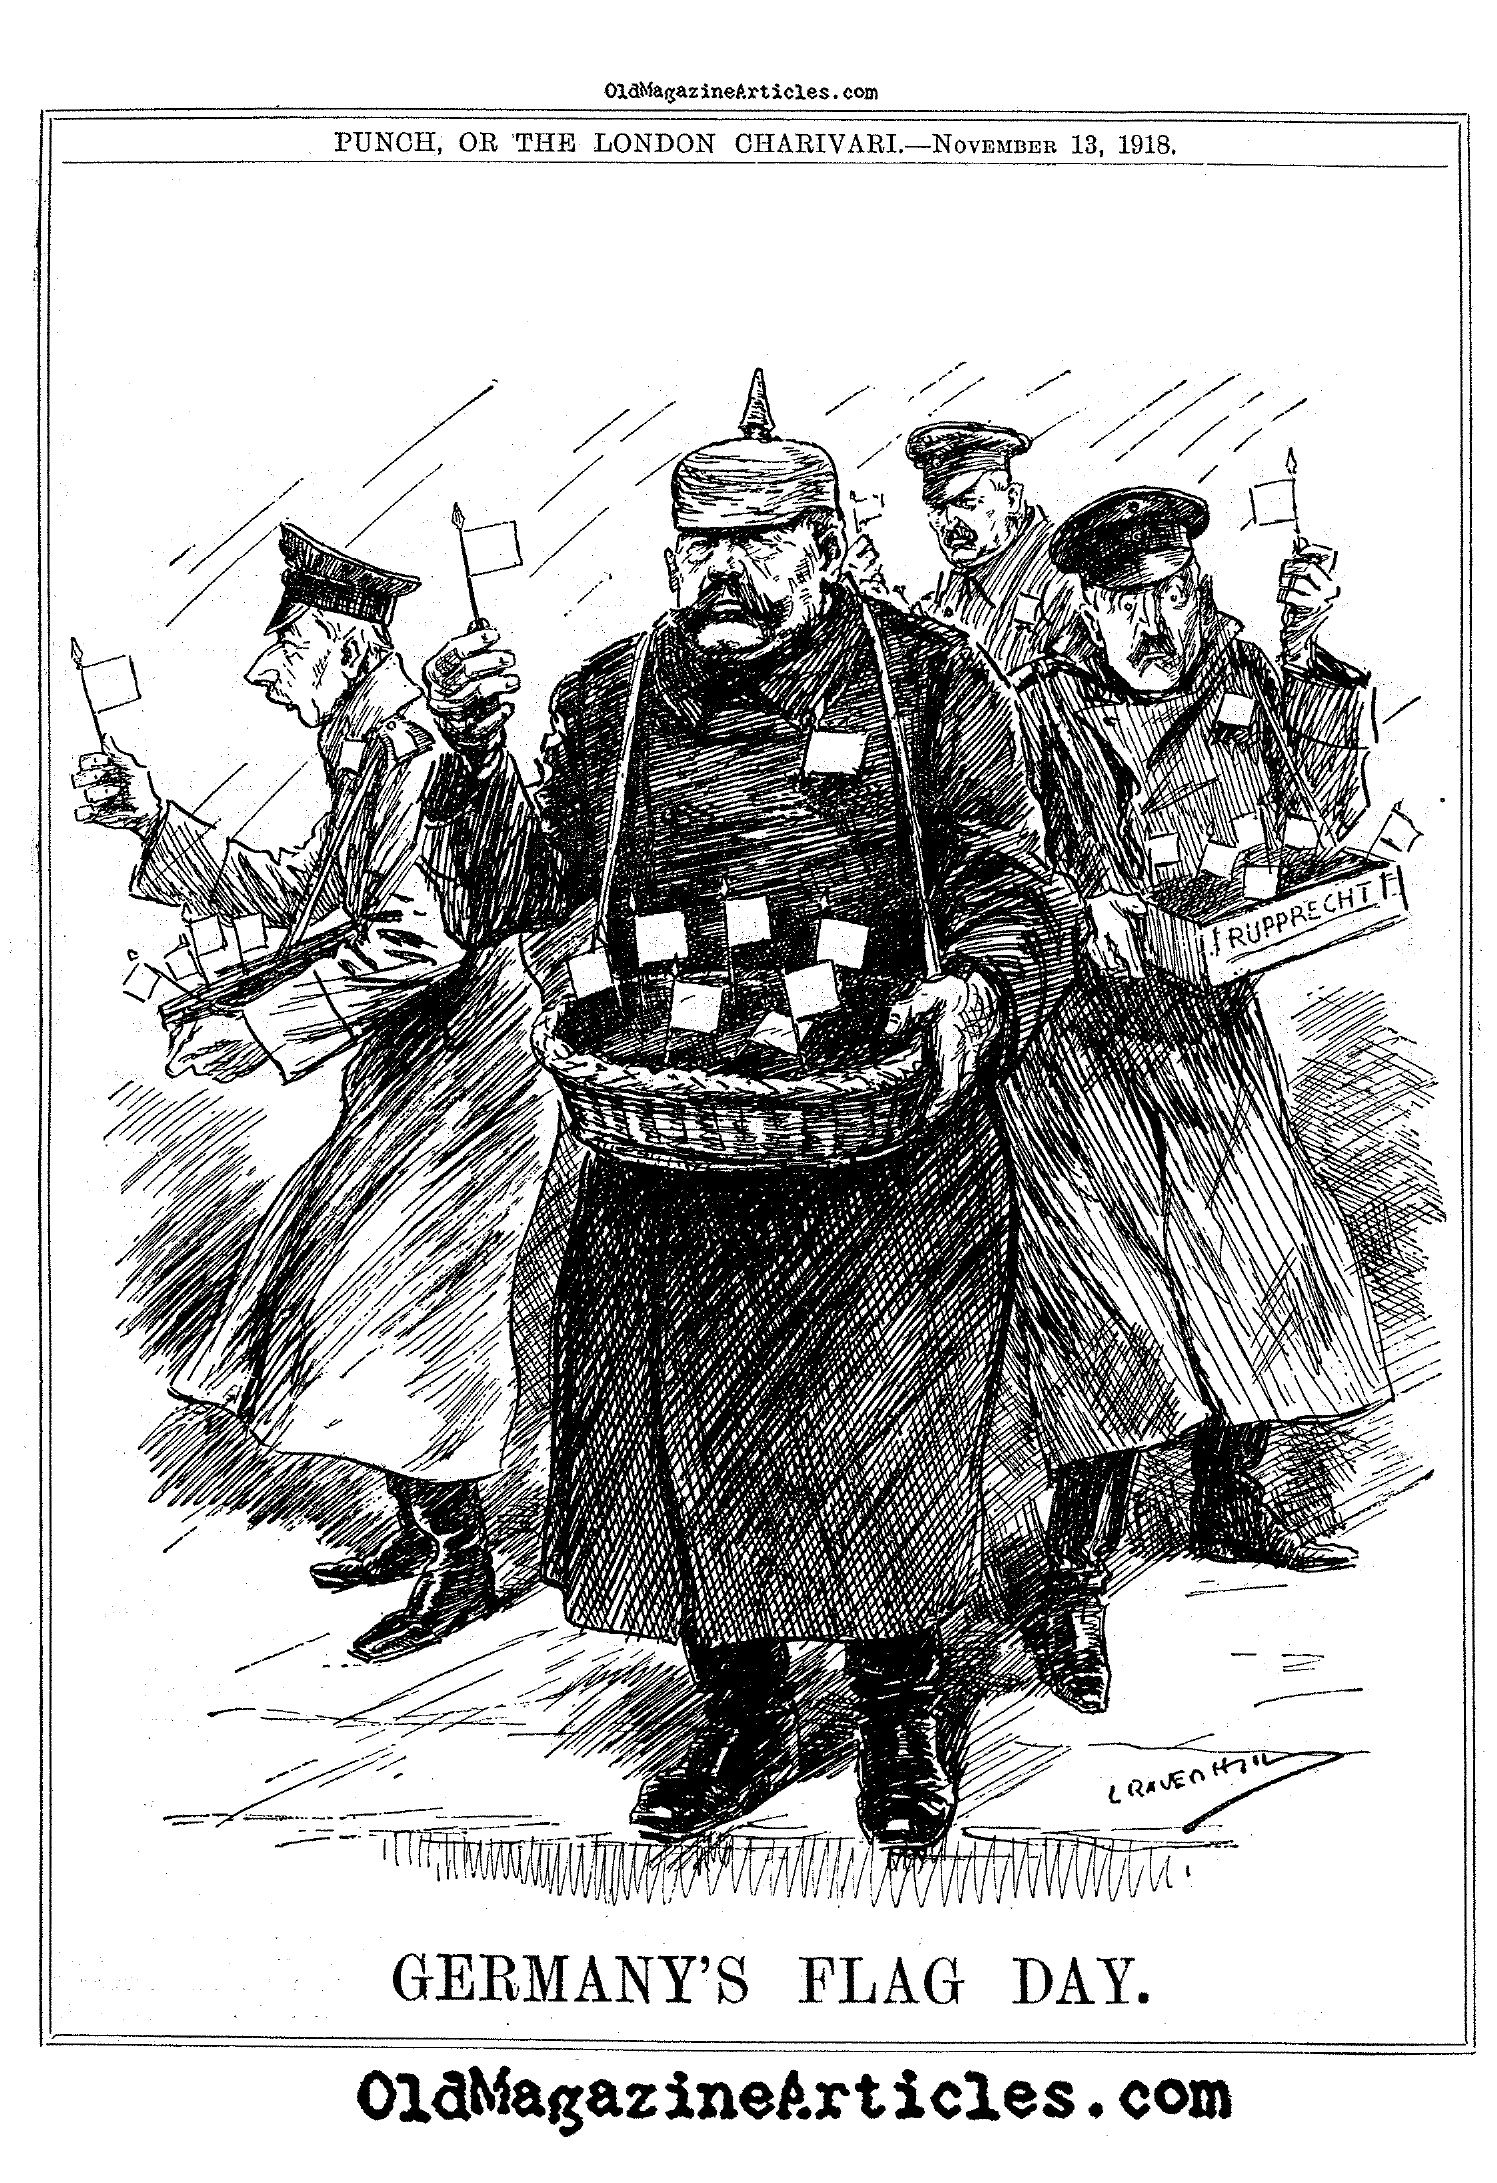 Flag Day in Germany  (Punch, 1918)